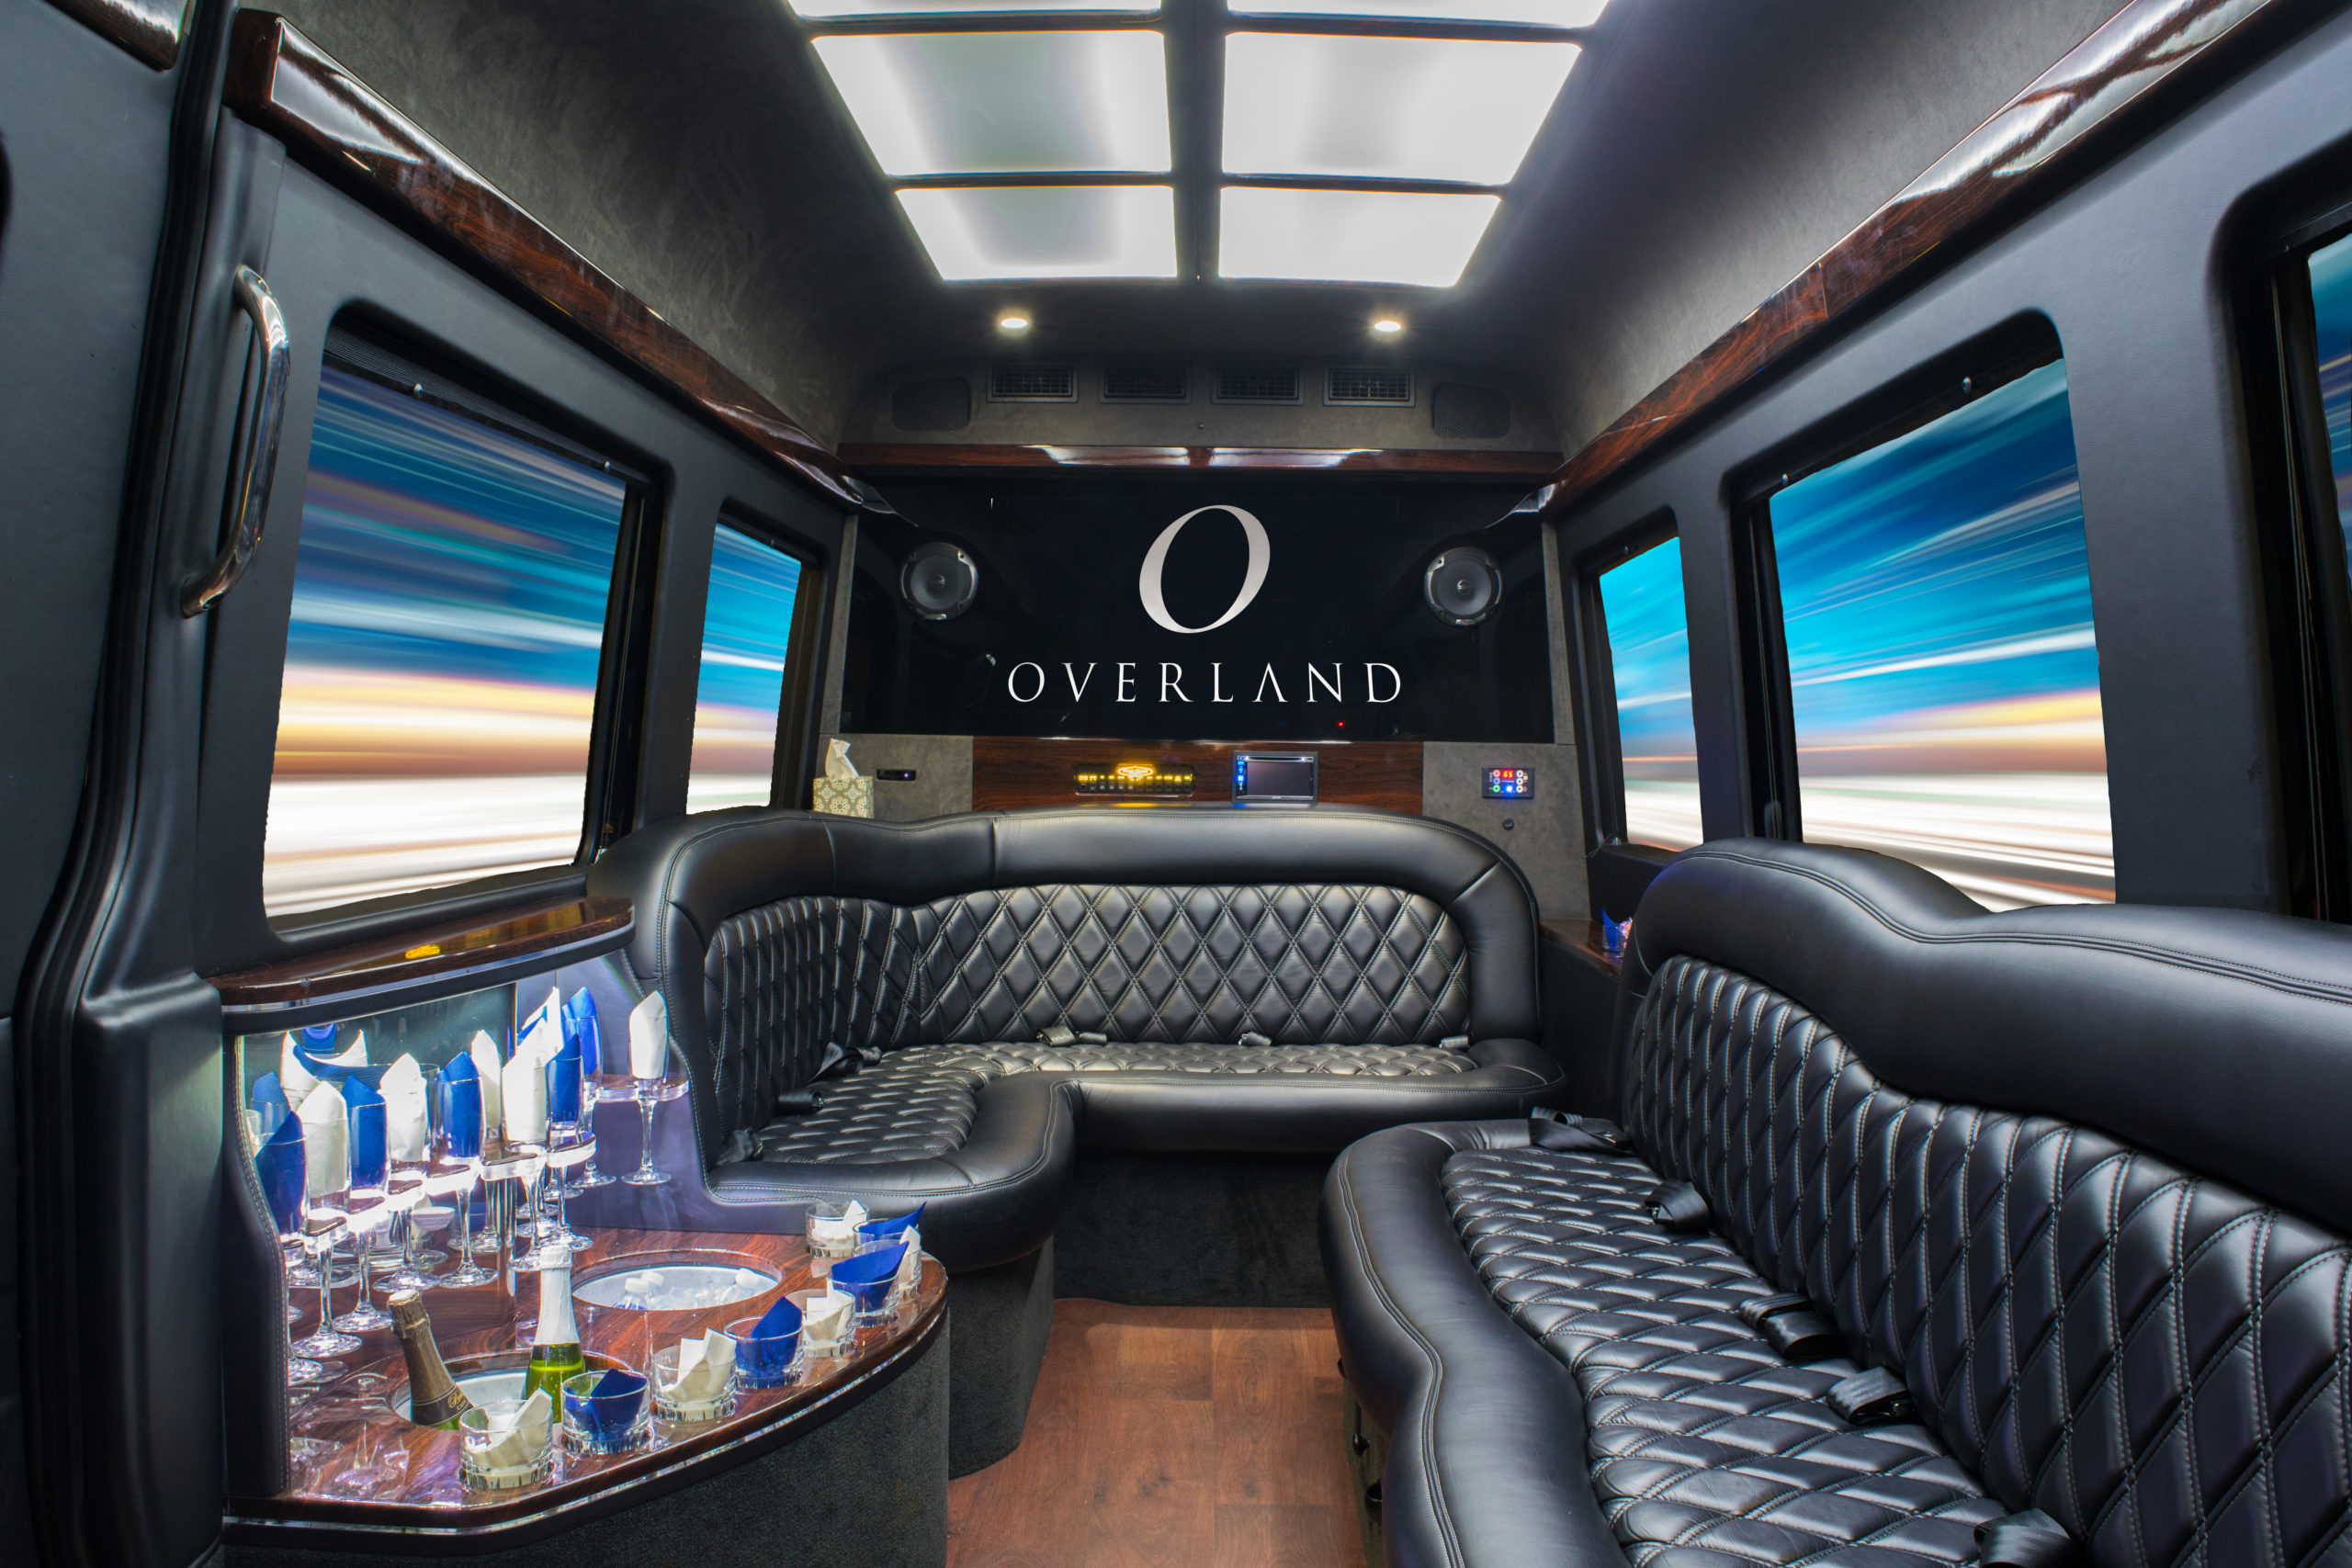 How Much Does It Cost to Rent a Limo for a Night?